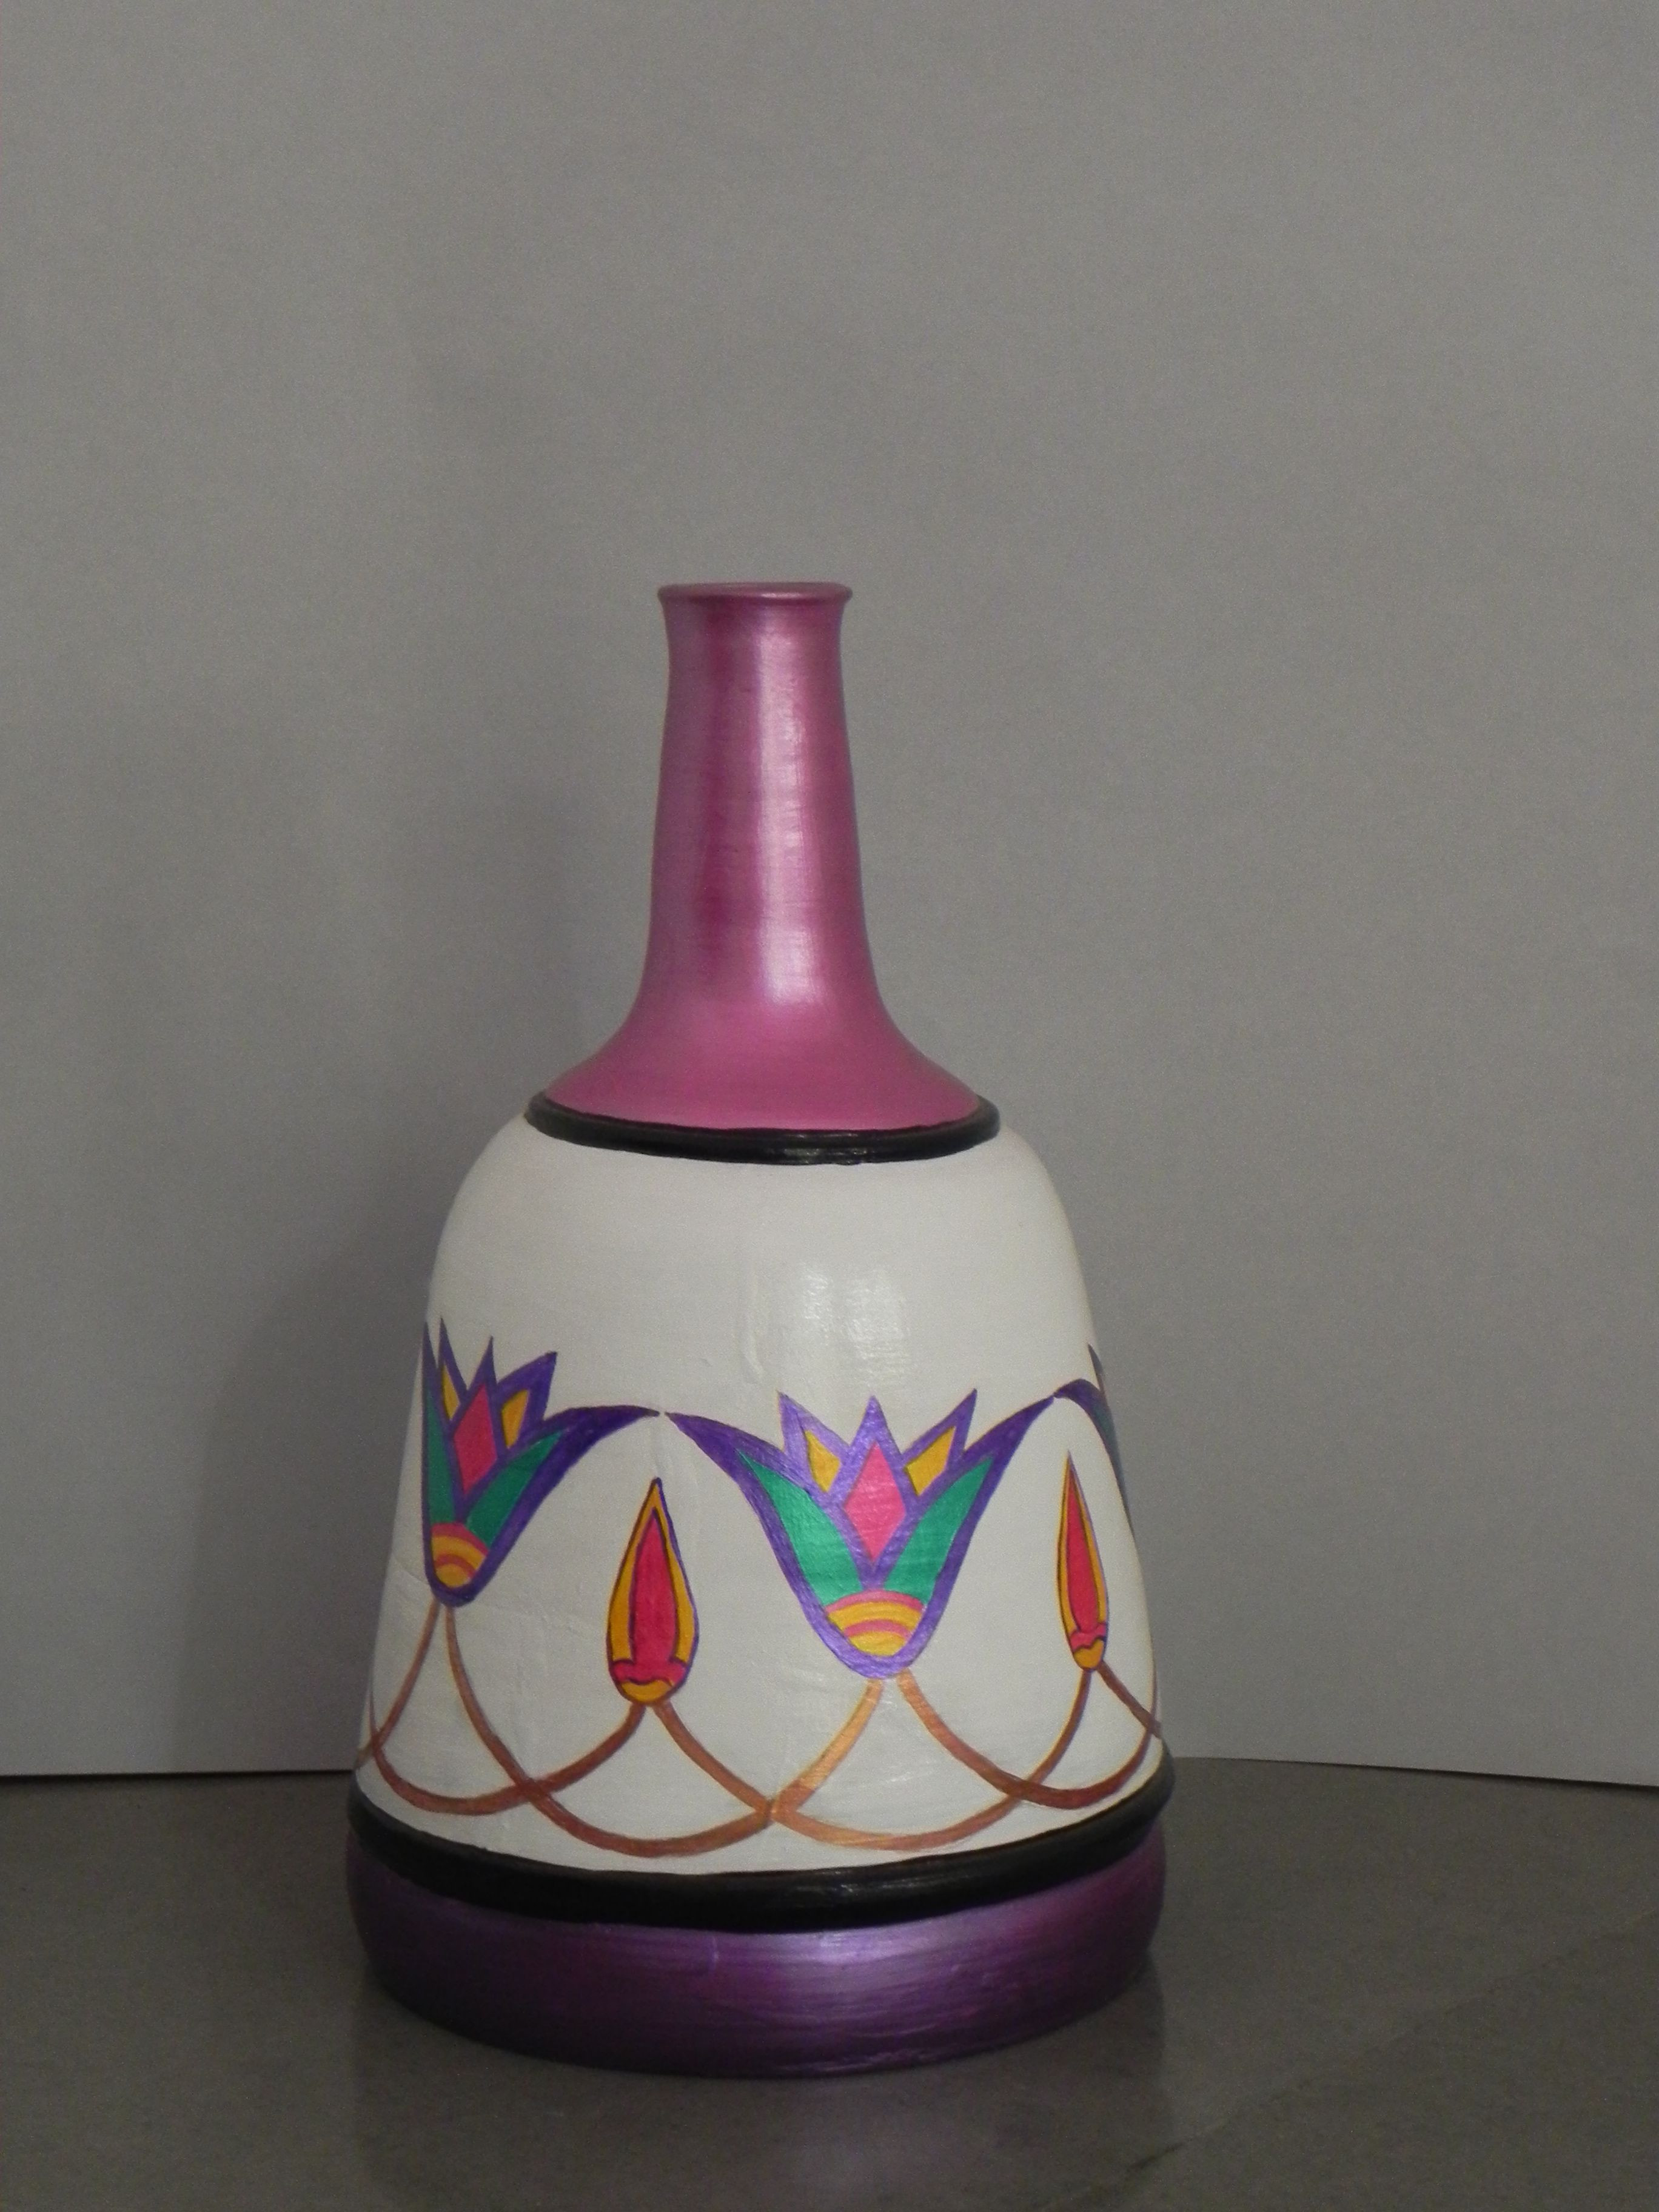 ceramic vases in bulk of egyptian style pot floral design in egyptian style white background with egyptian style pot floral design in egyptian style white background pink neck violet bottom size 15 5 tall x 9